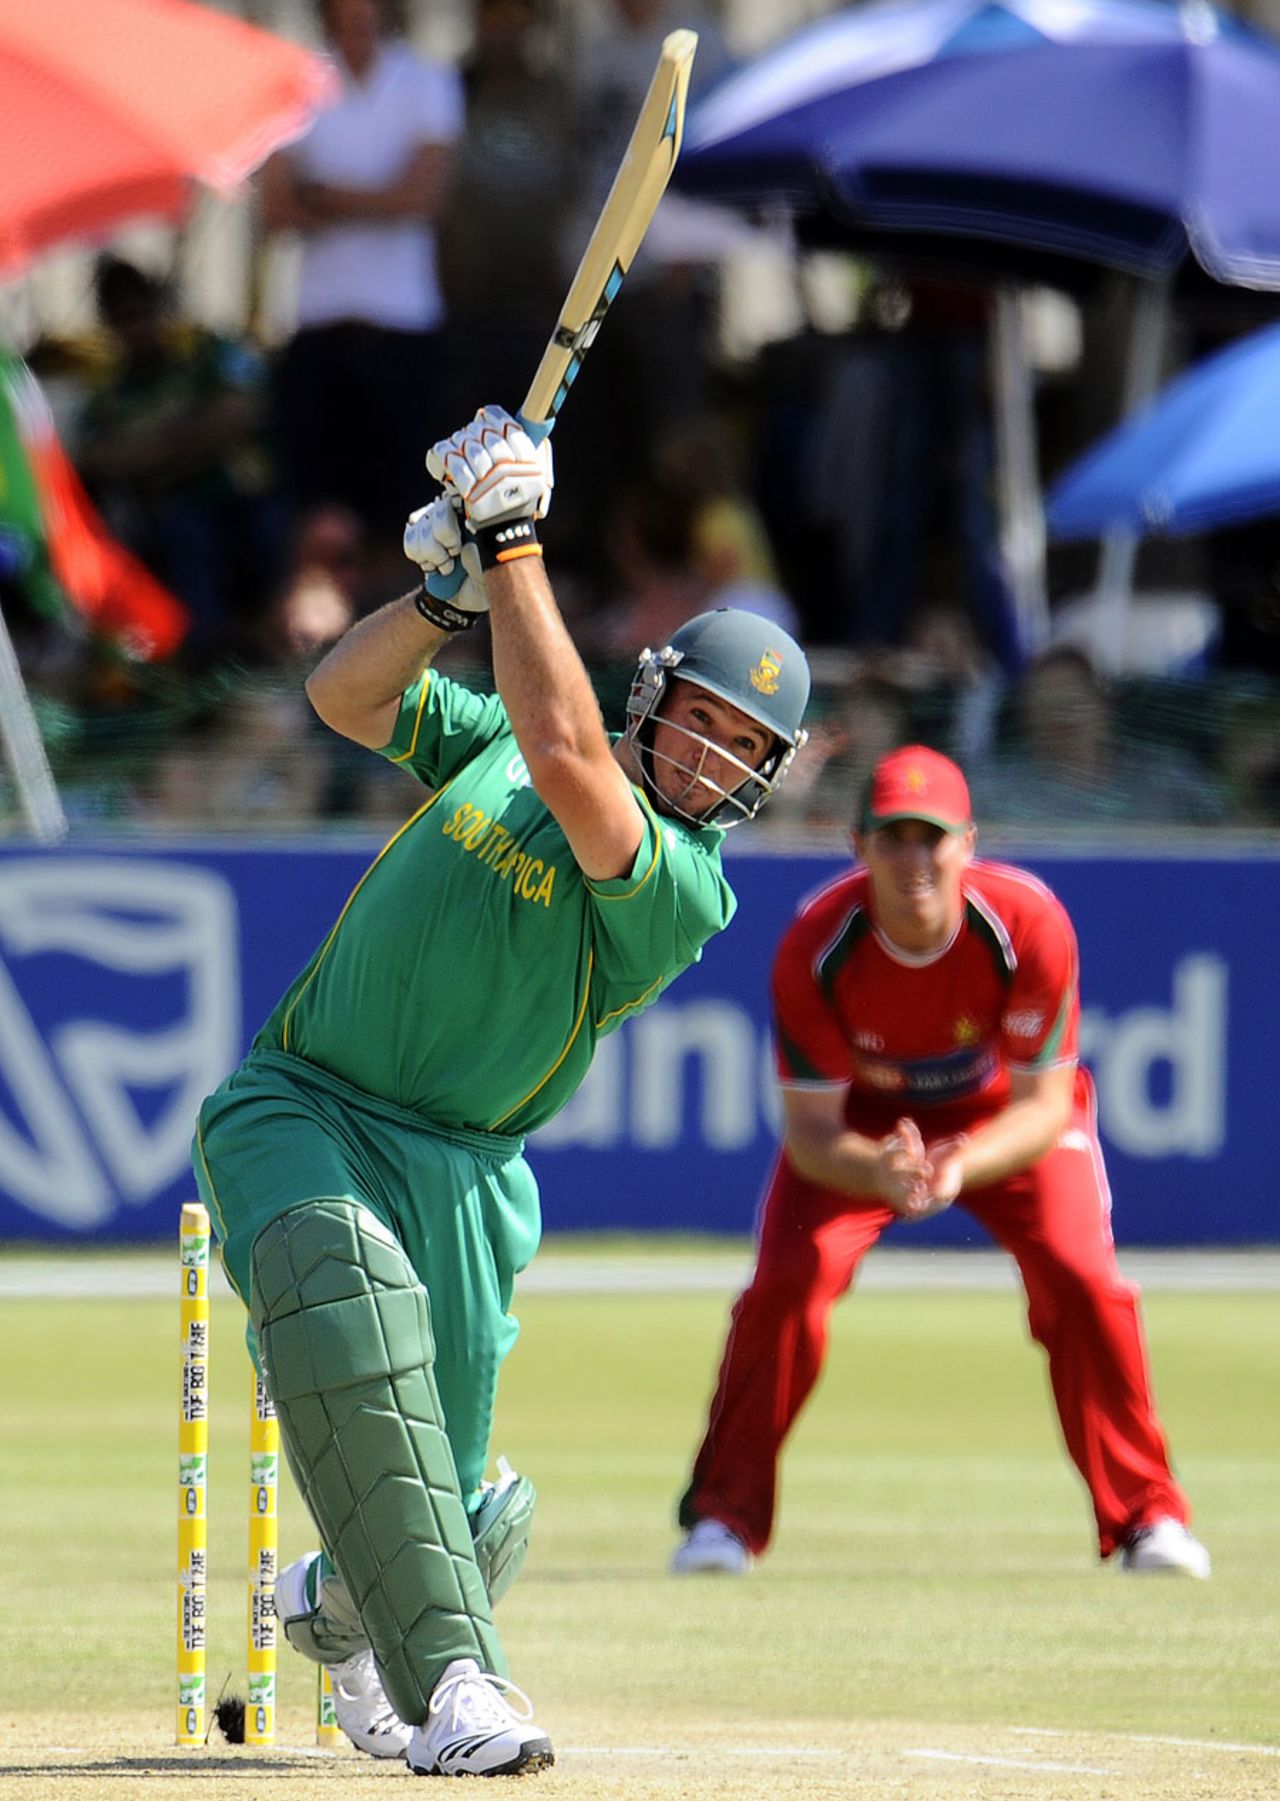 Graeme Smith launches one straight down the ground, South Africa v Zimbabwe, 2nd ODI, Potchefstroom, October 17, 2010